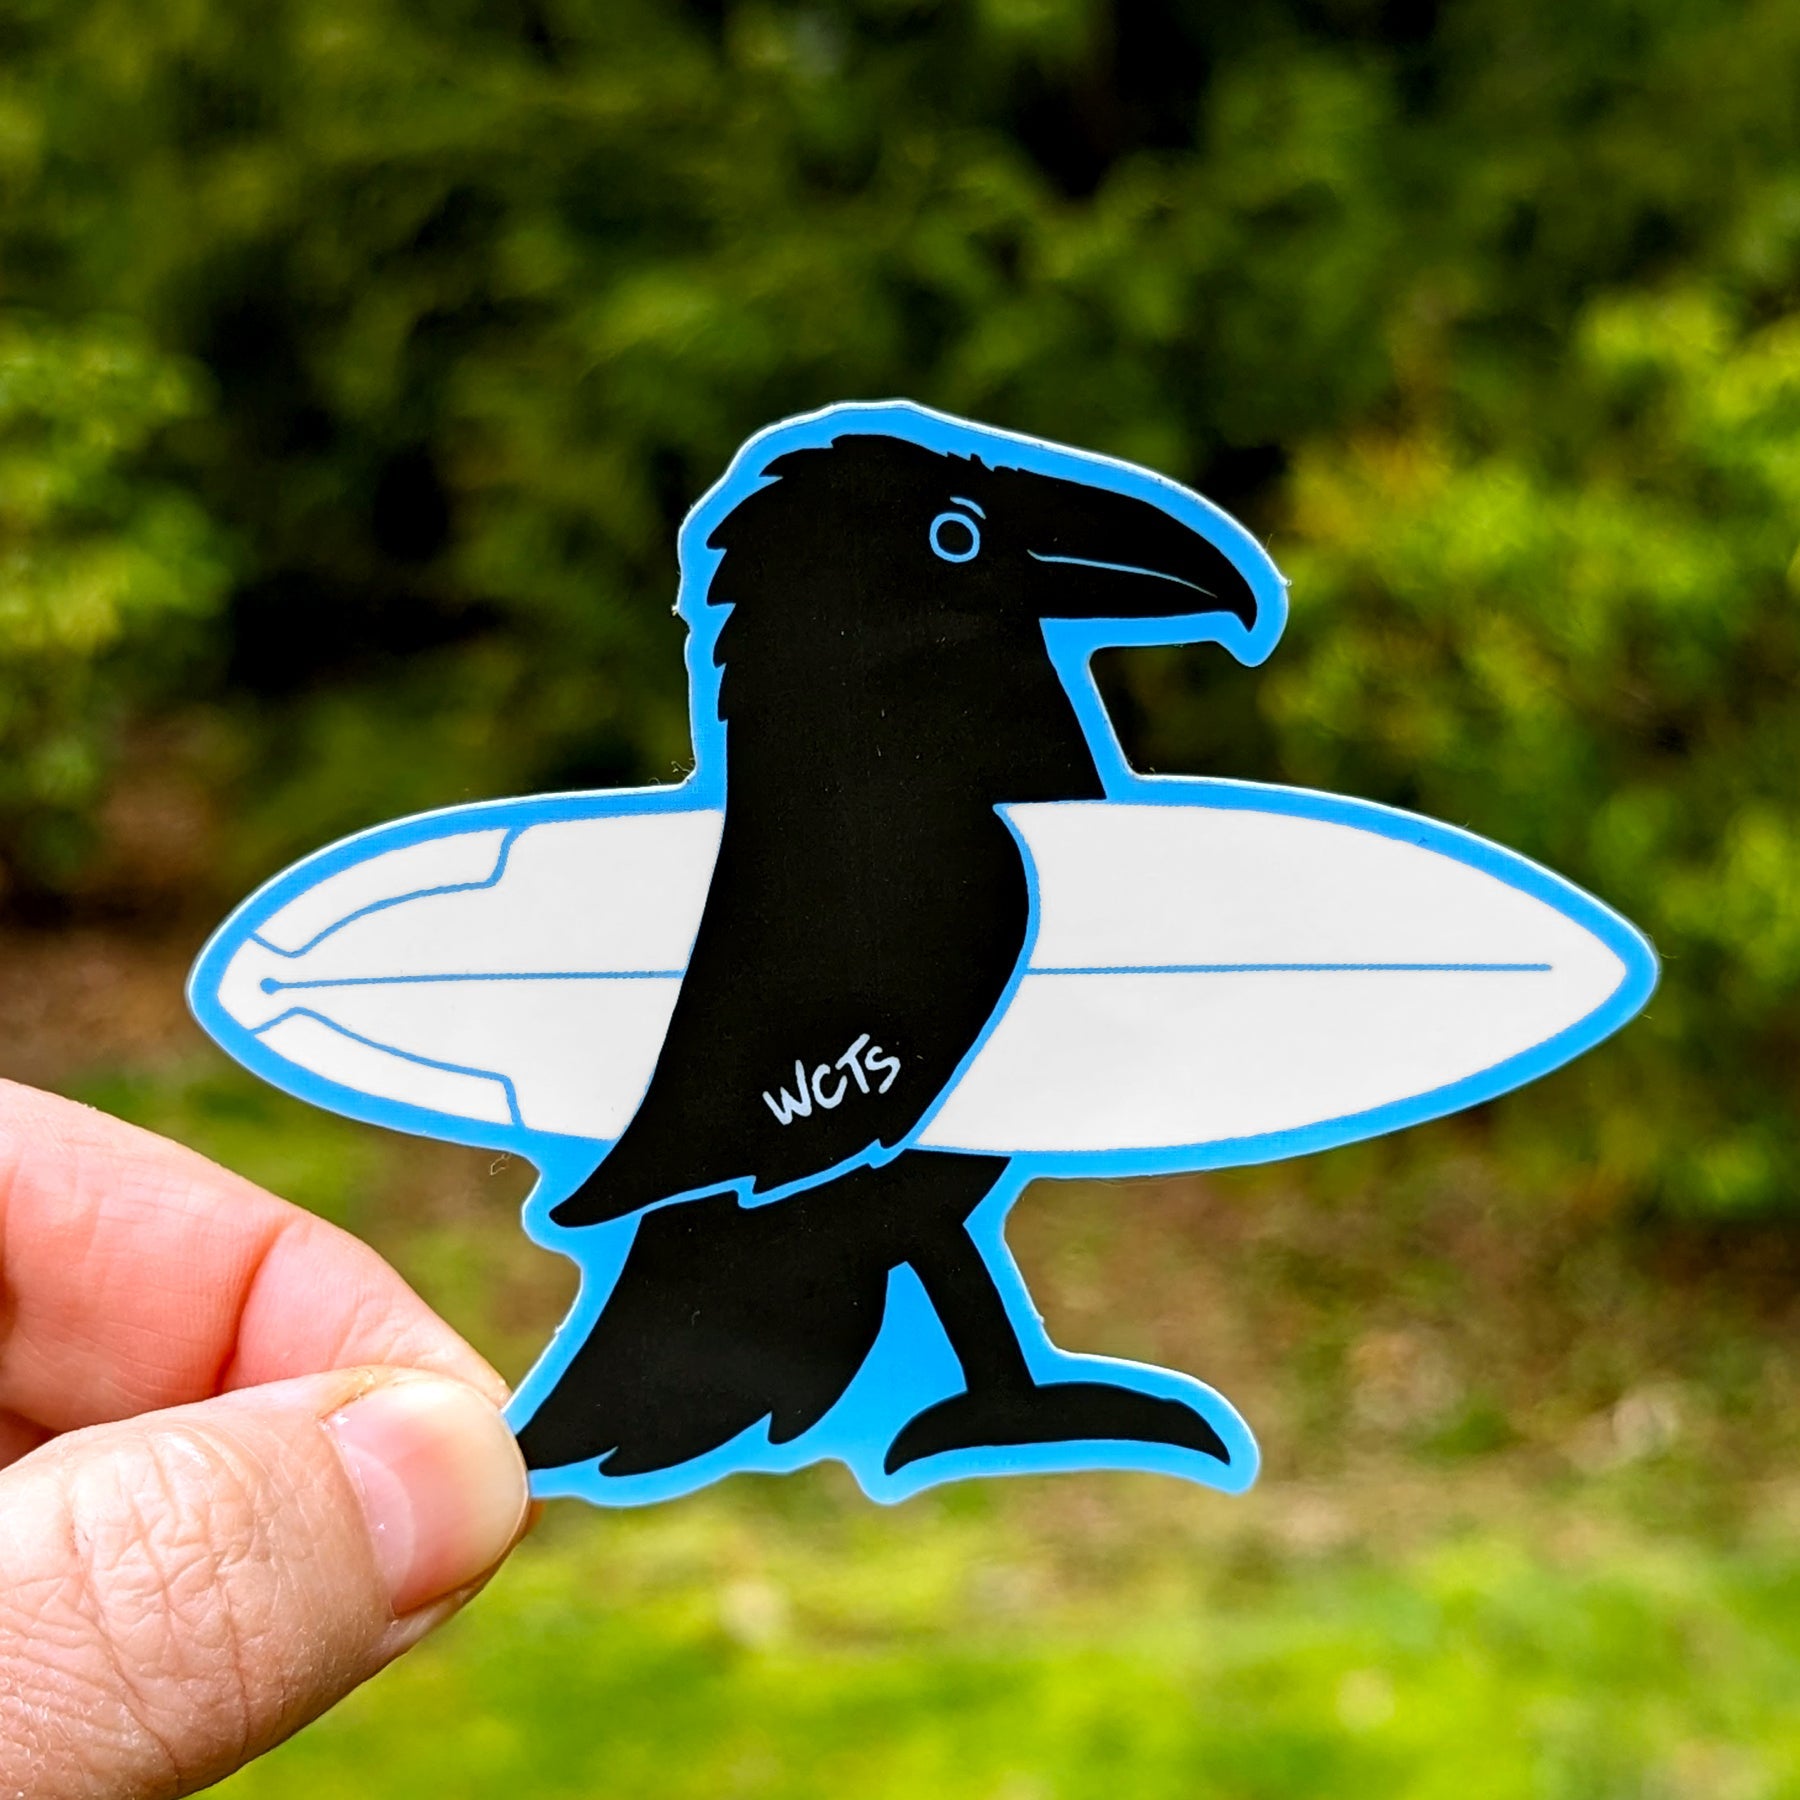 Westcoastees Raven Surfer Sticker - Westcoastees Raven Surfer Sticker -  - House of Himwitsa Native Art Gallery and Gifts